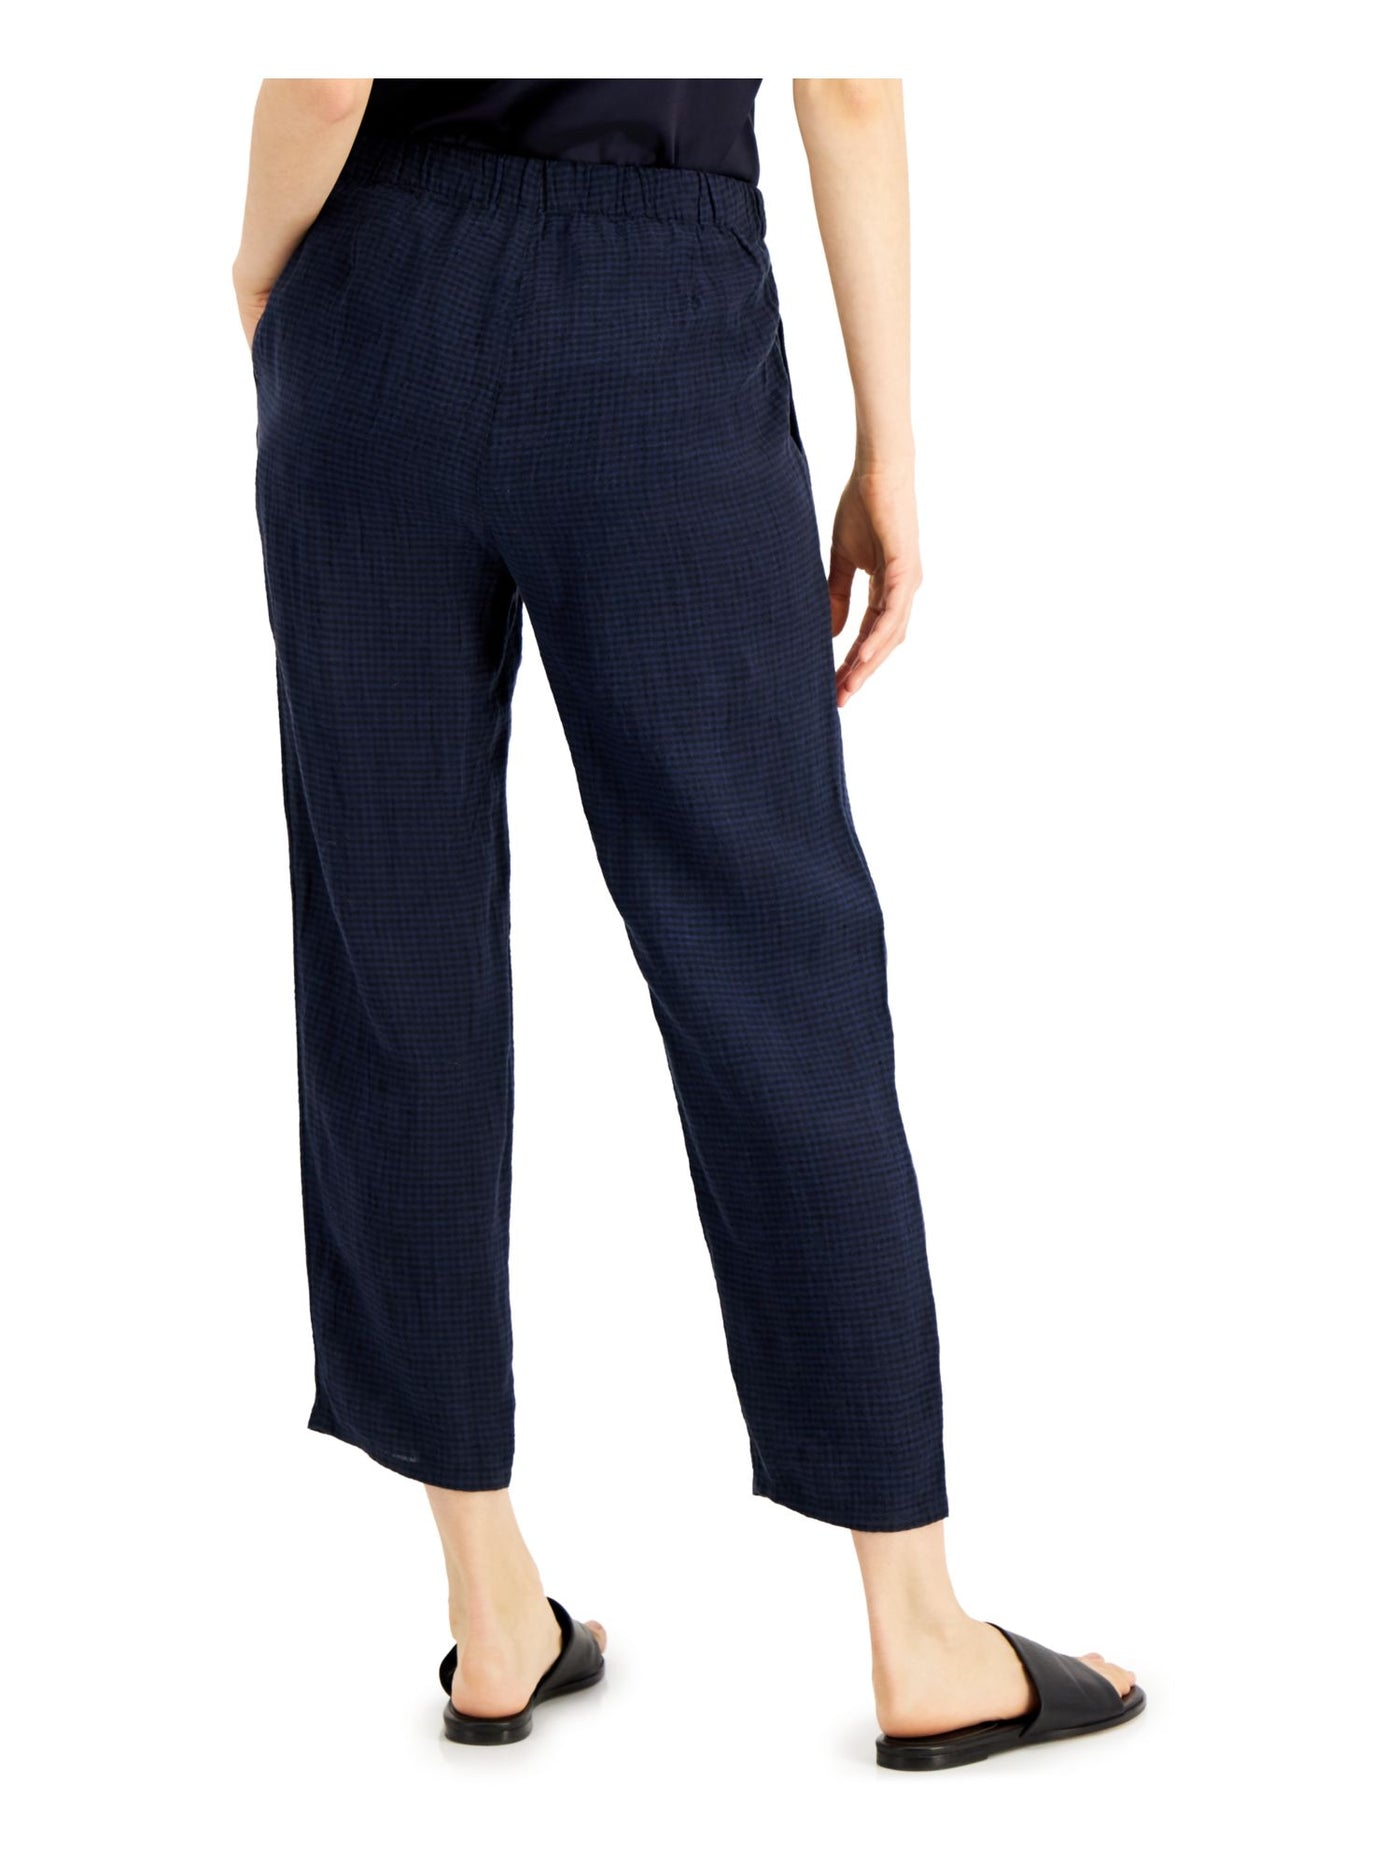 EILEEN FISHER Womens Blue Stretch Pleated Pocketed Elastic Waist Wear To Work Straight leg Pants S